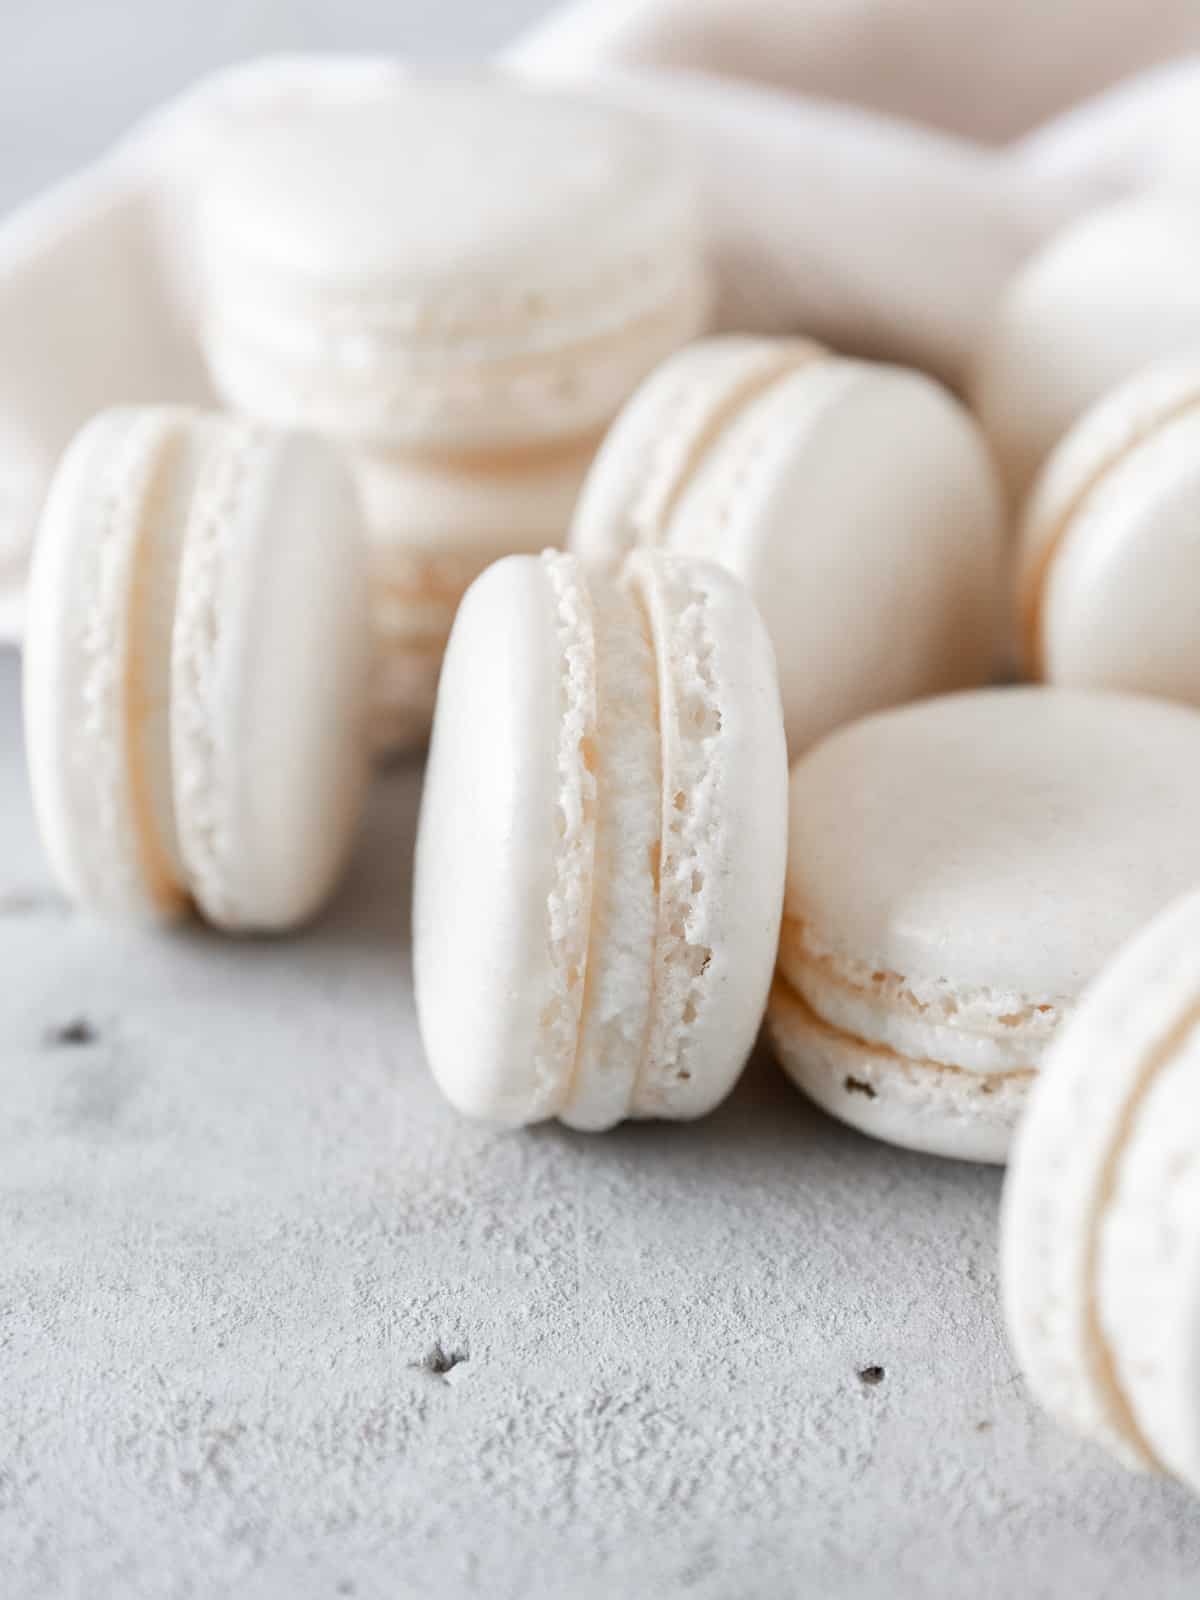 macarons laid out and stacked together on a grey background